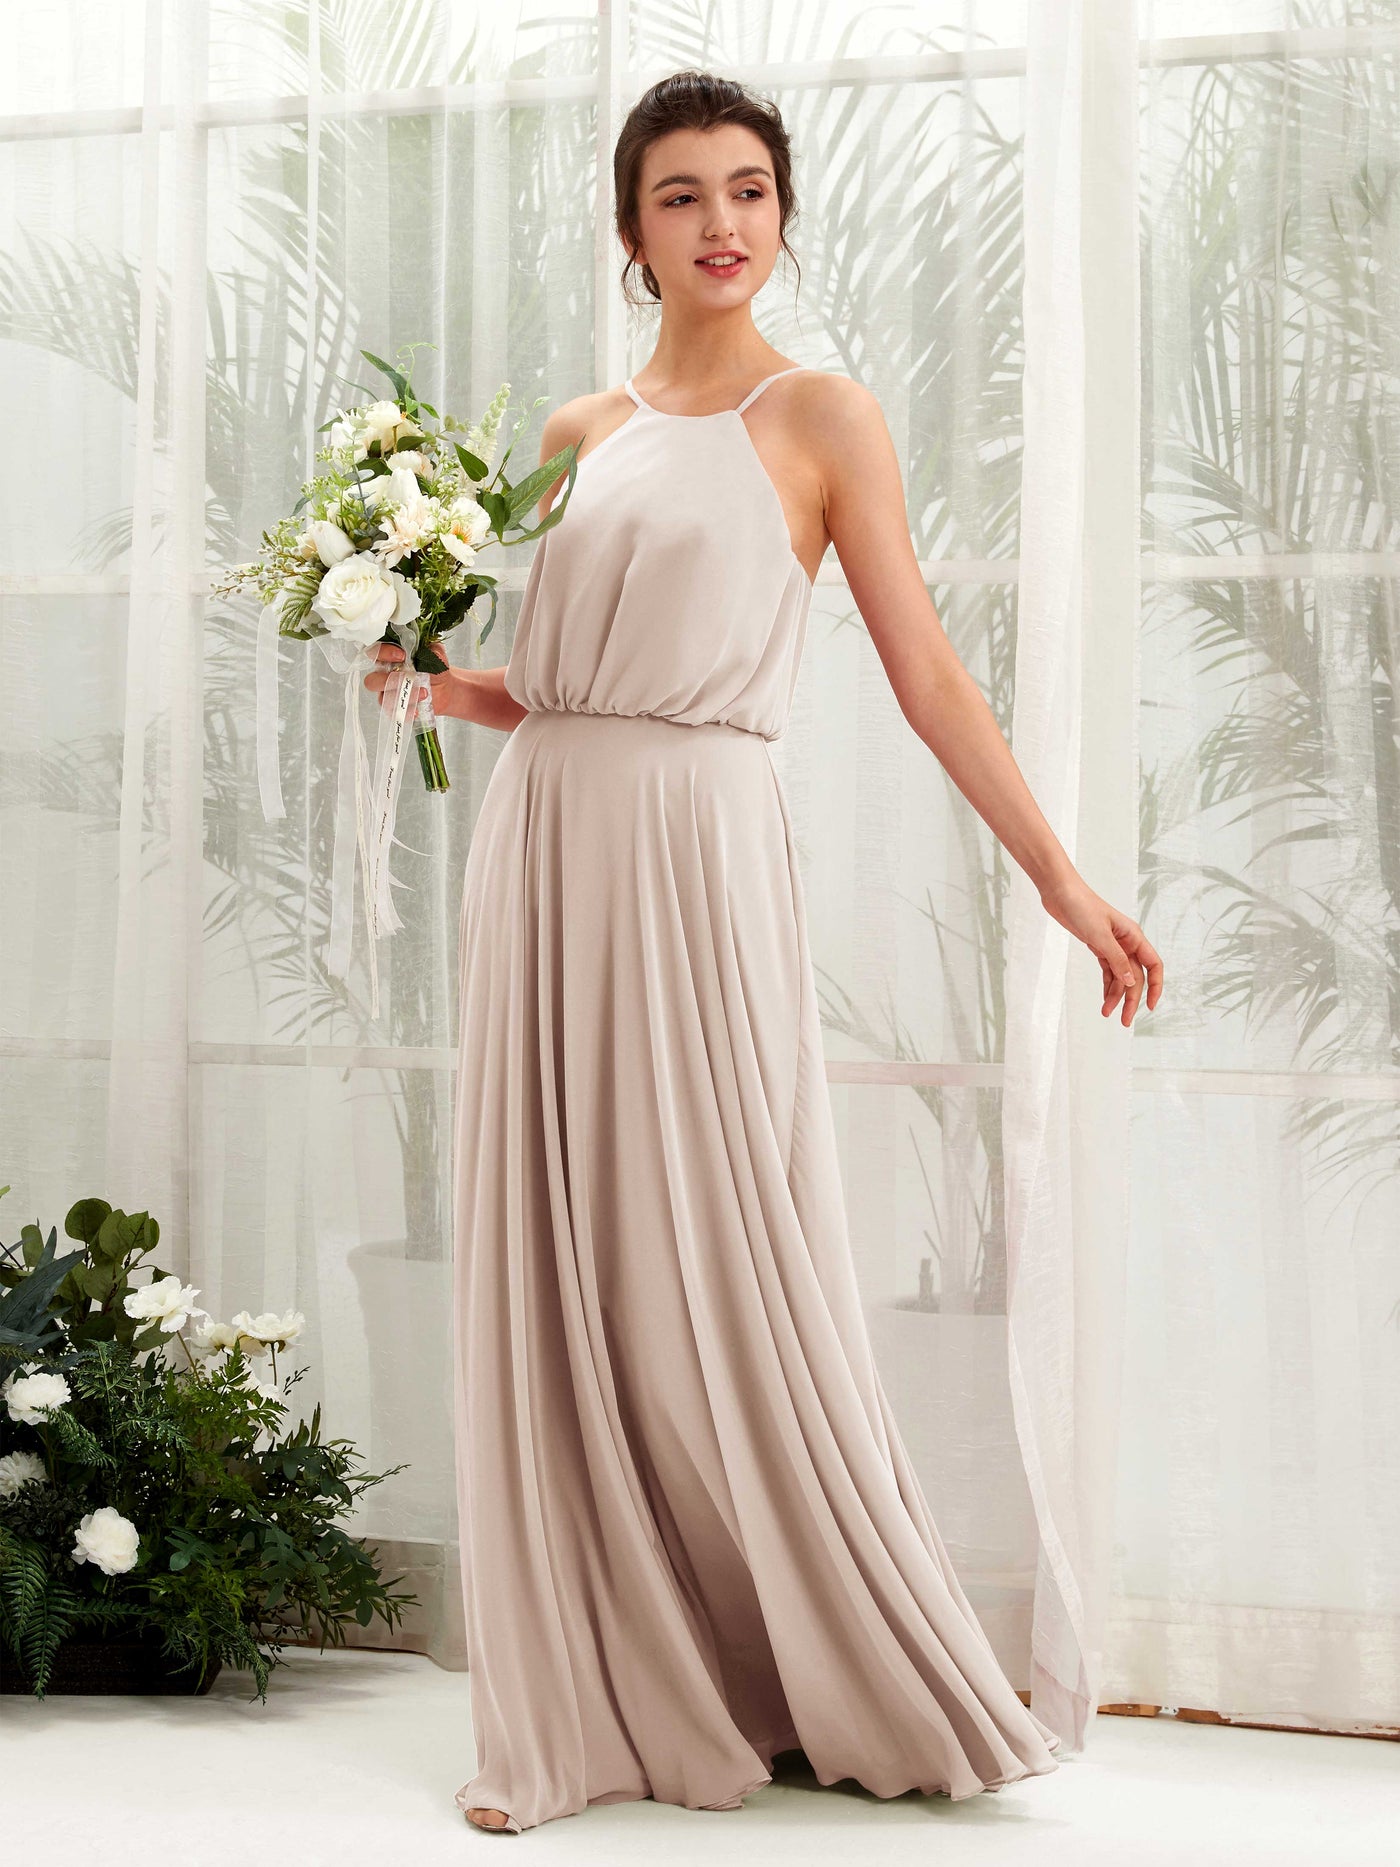 Champagne Bridesmaid Dresses Bridesmaid Dress Ball Gown Chiffon Halter Full Length Sleeveless Wedding Party Dress (81223416)#color_champagne